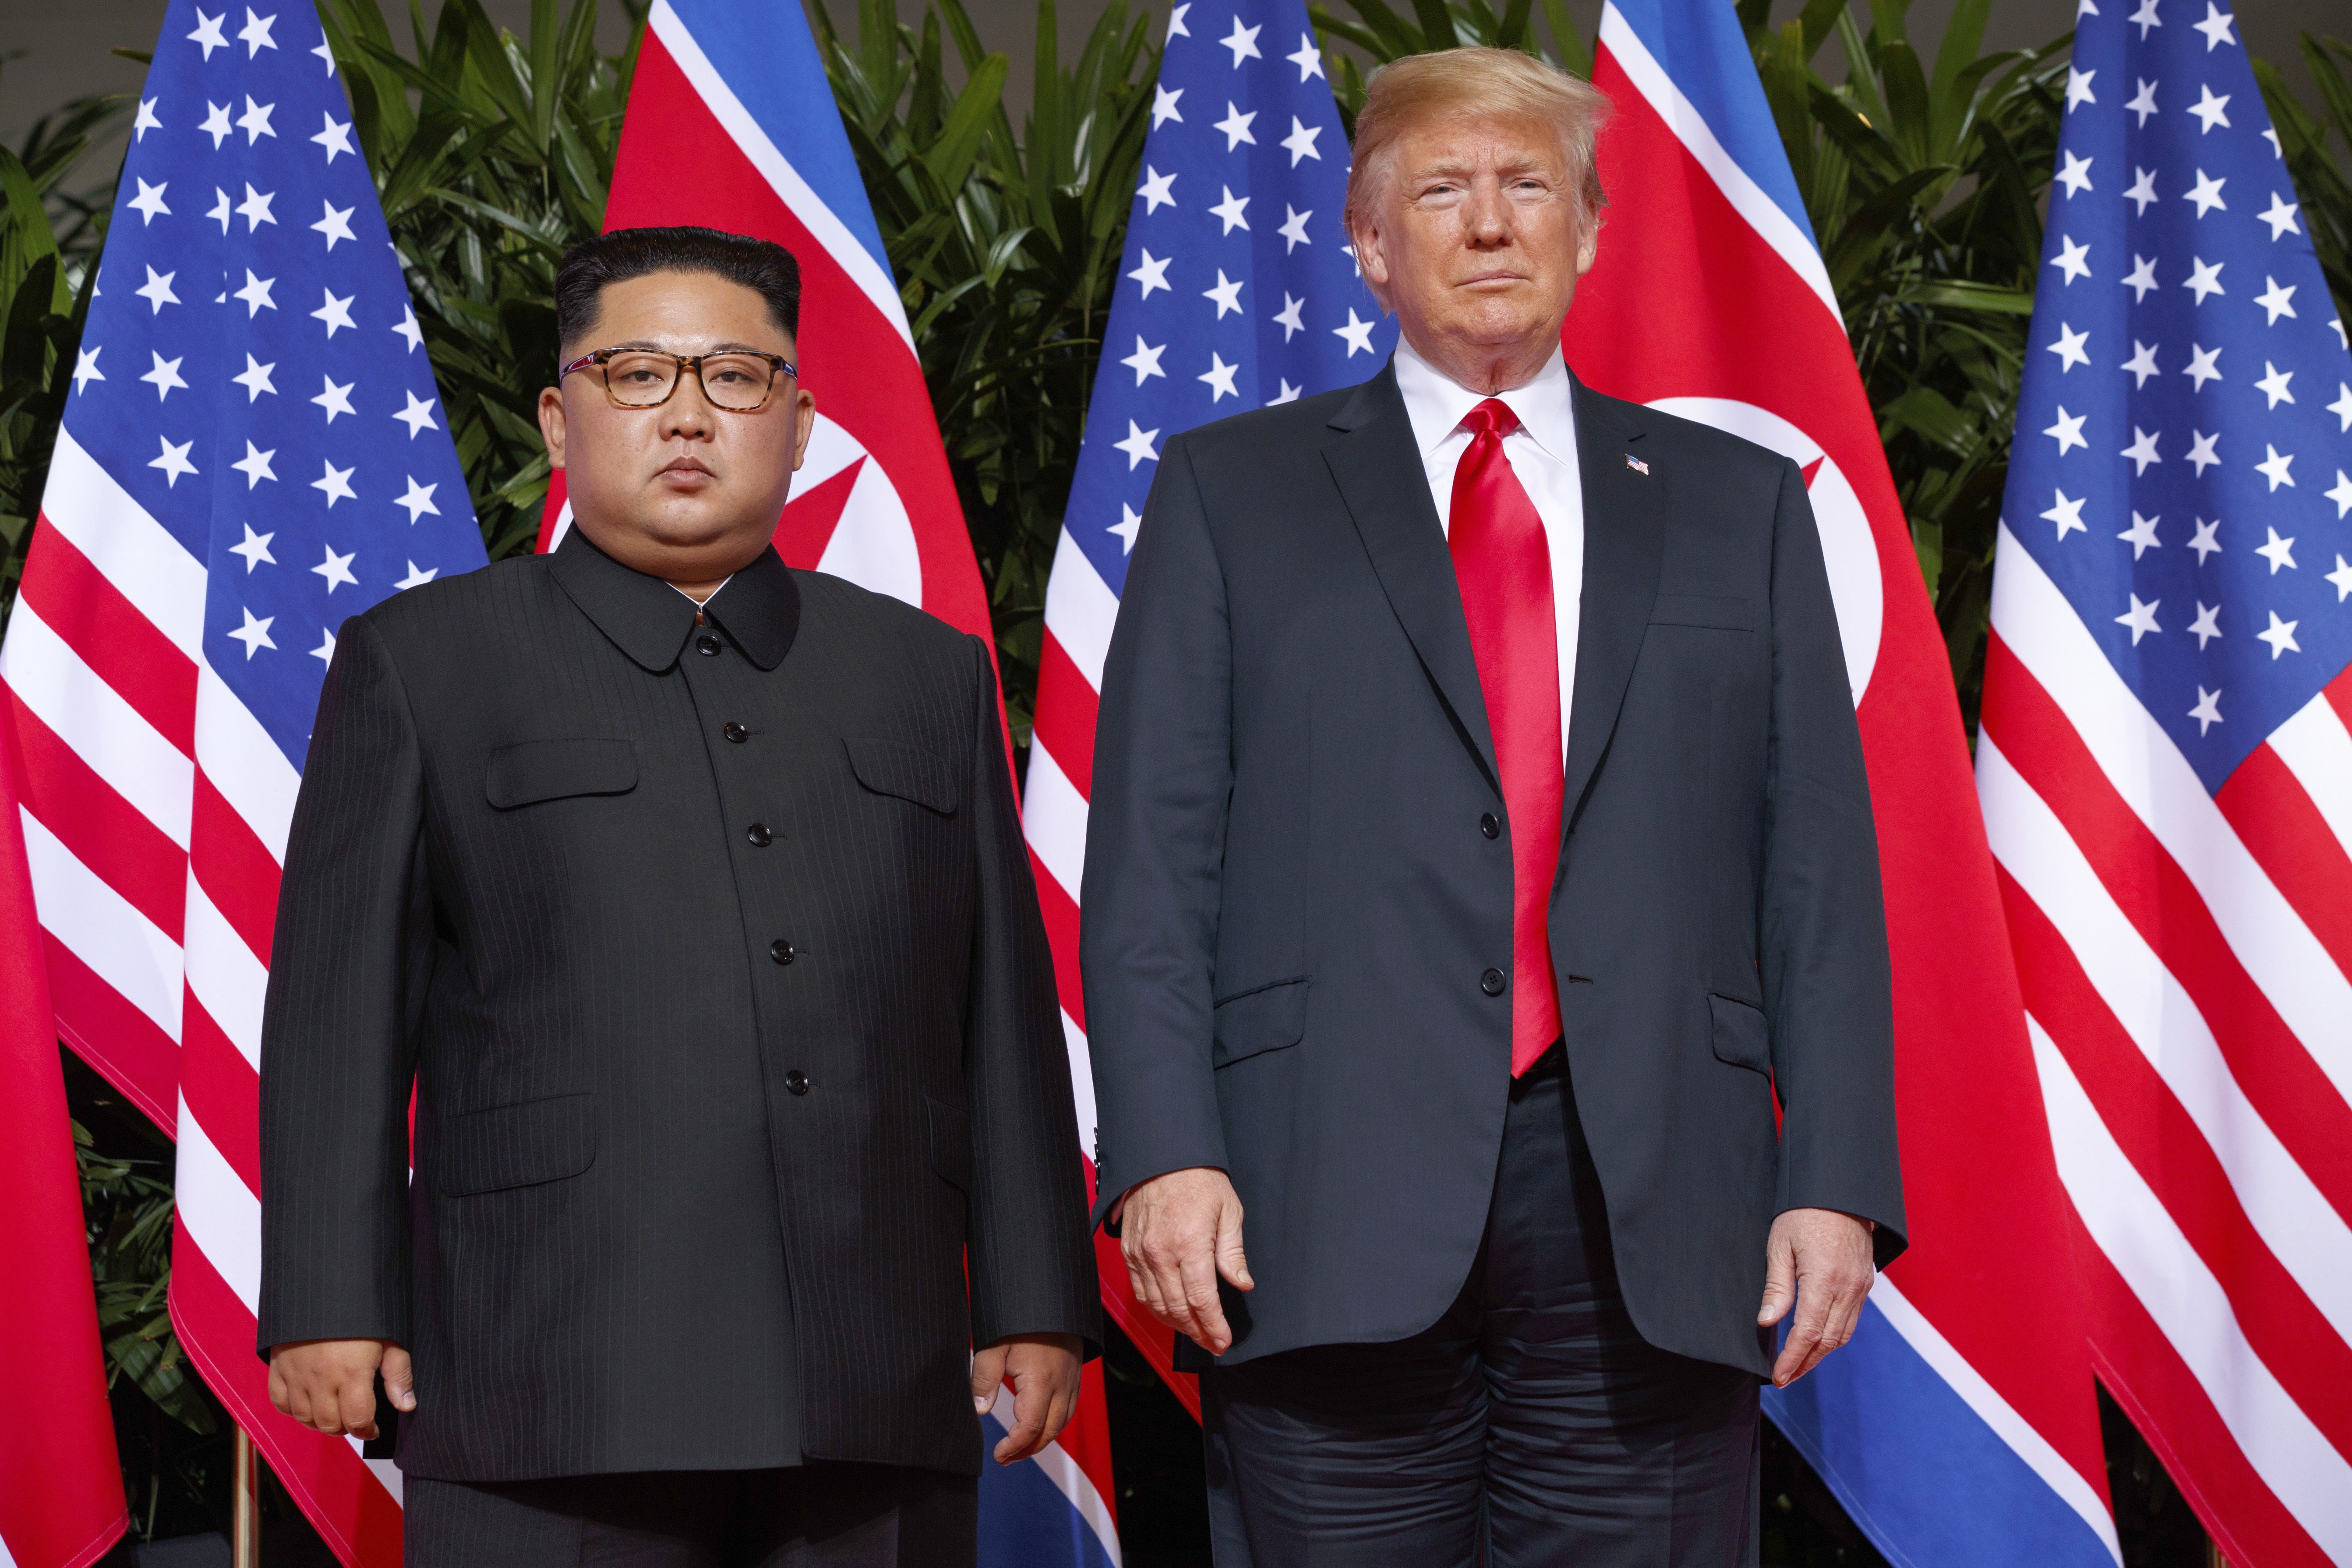 US President Donald Trump and North Korean leader Kim Jong-un during their Singapore summit in June. The US president has suggested that a second summit between the two could take place early in 2019. Photo: AP